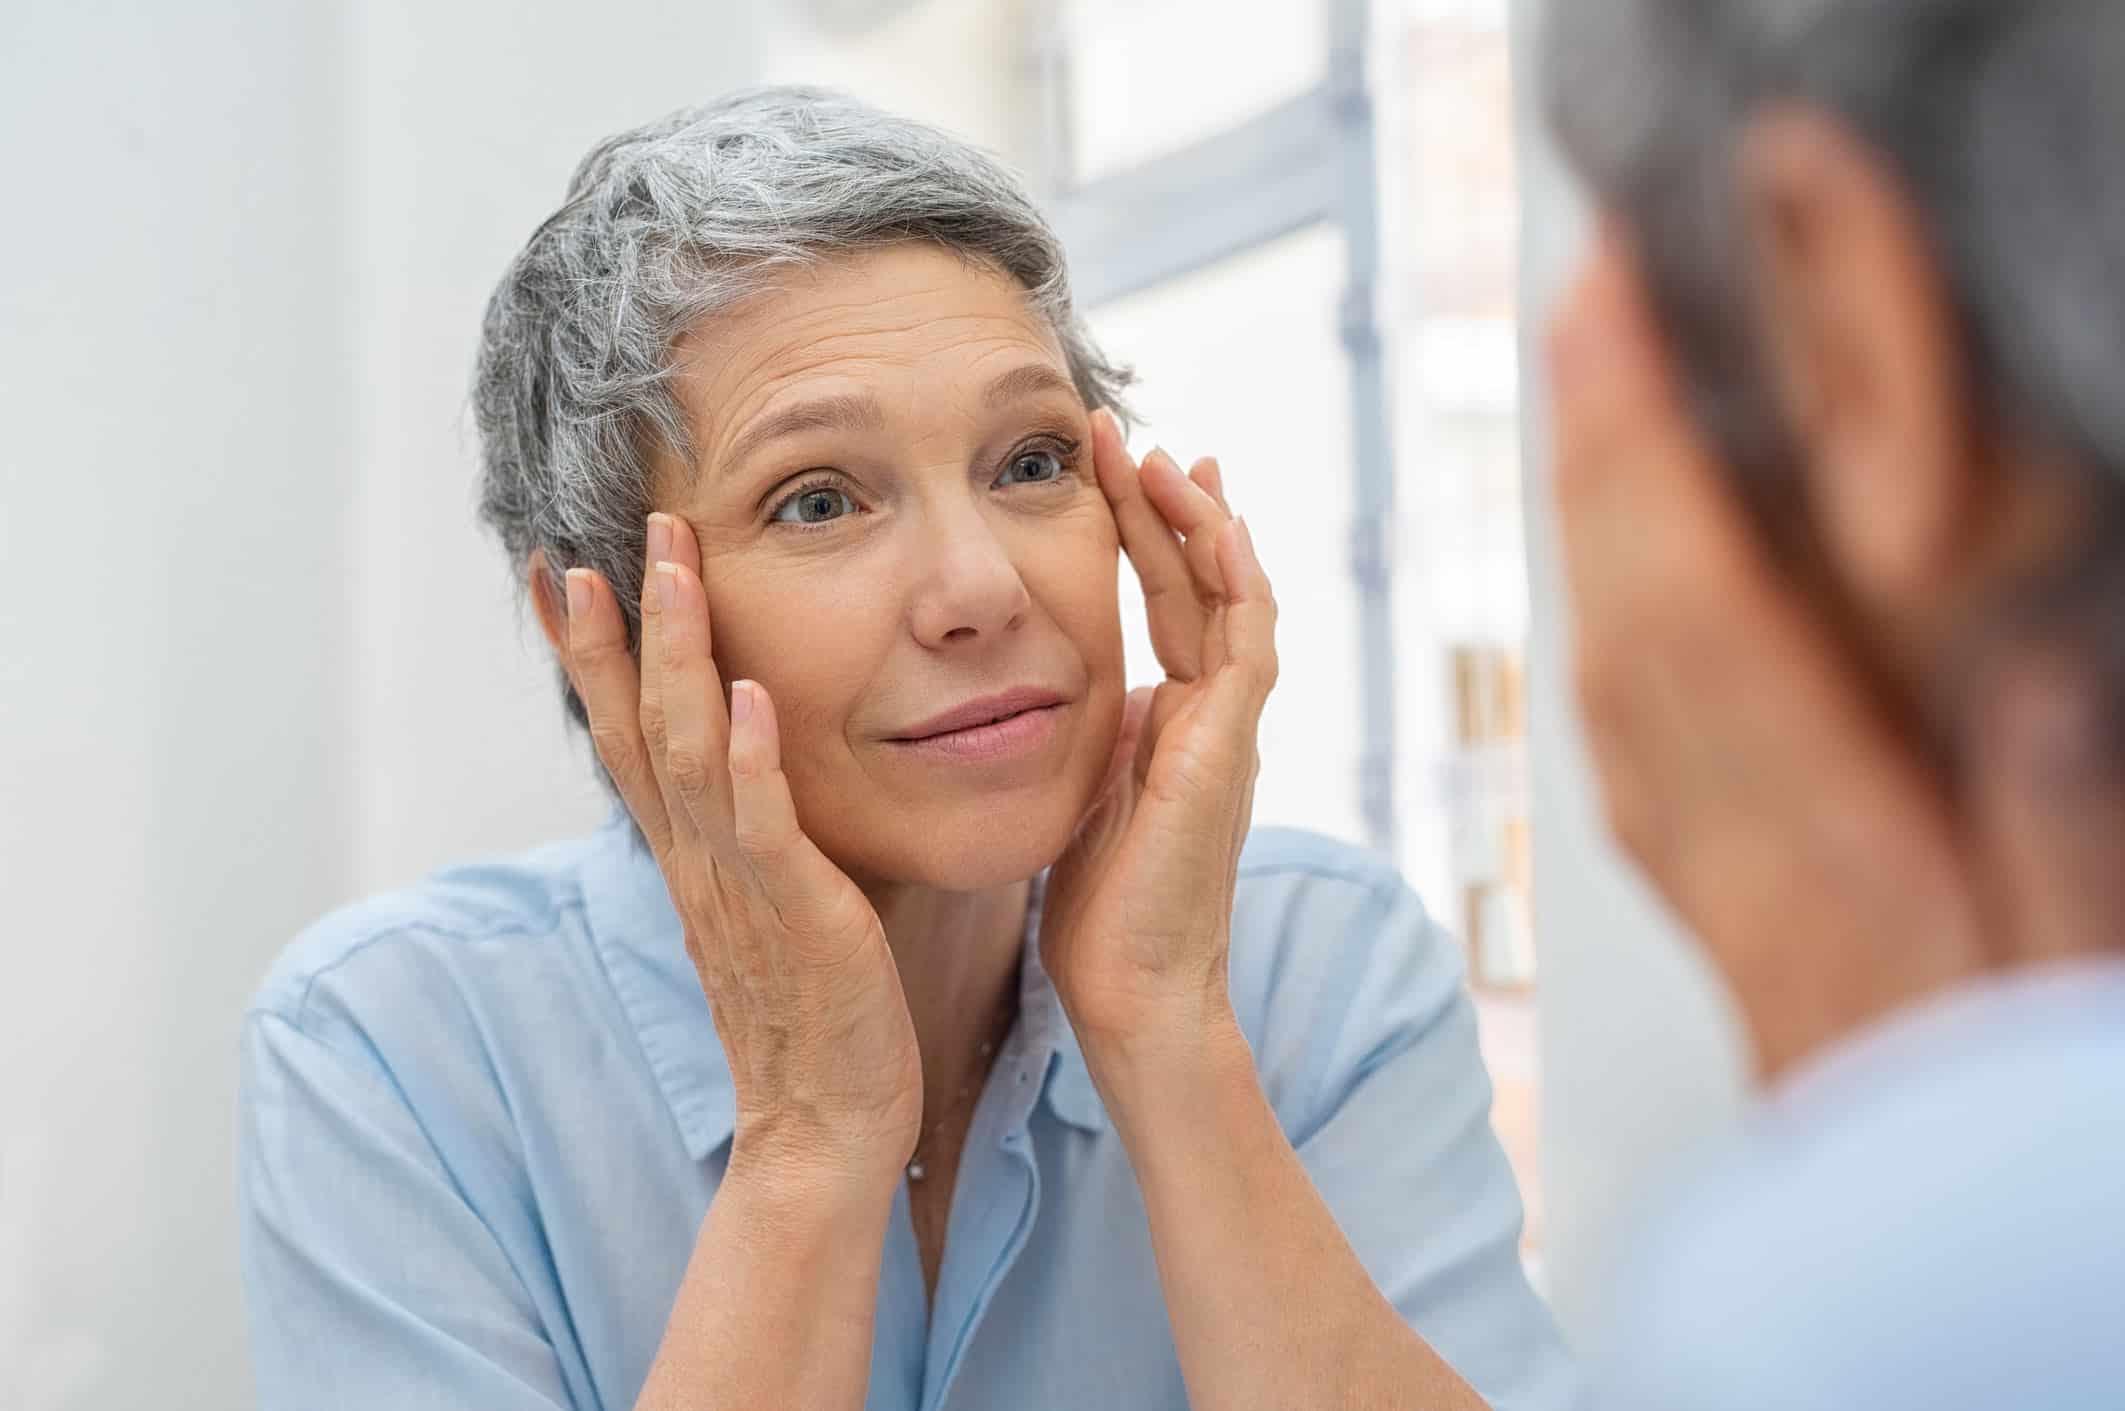 juvederm atlanta, image of a middle age woman with short gray hair gently touches and examines her face in the mirror.